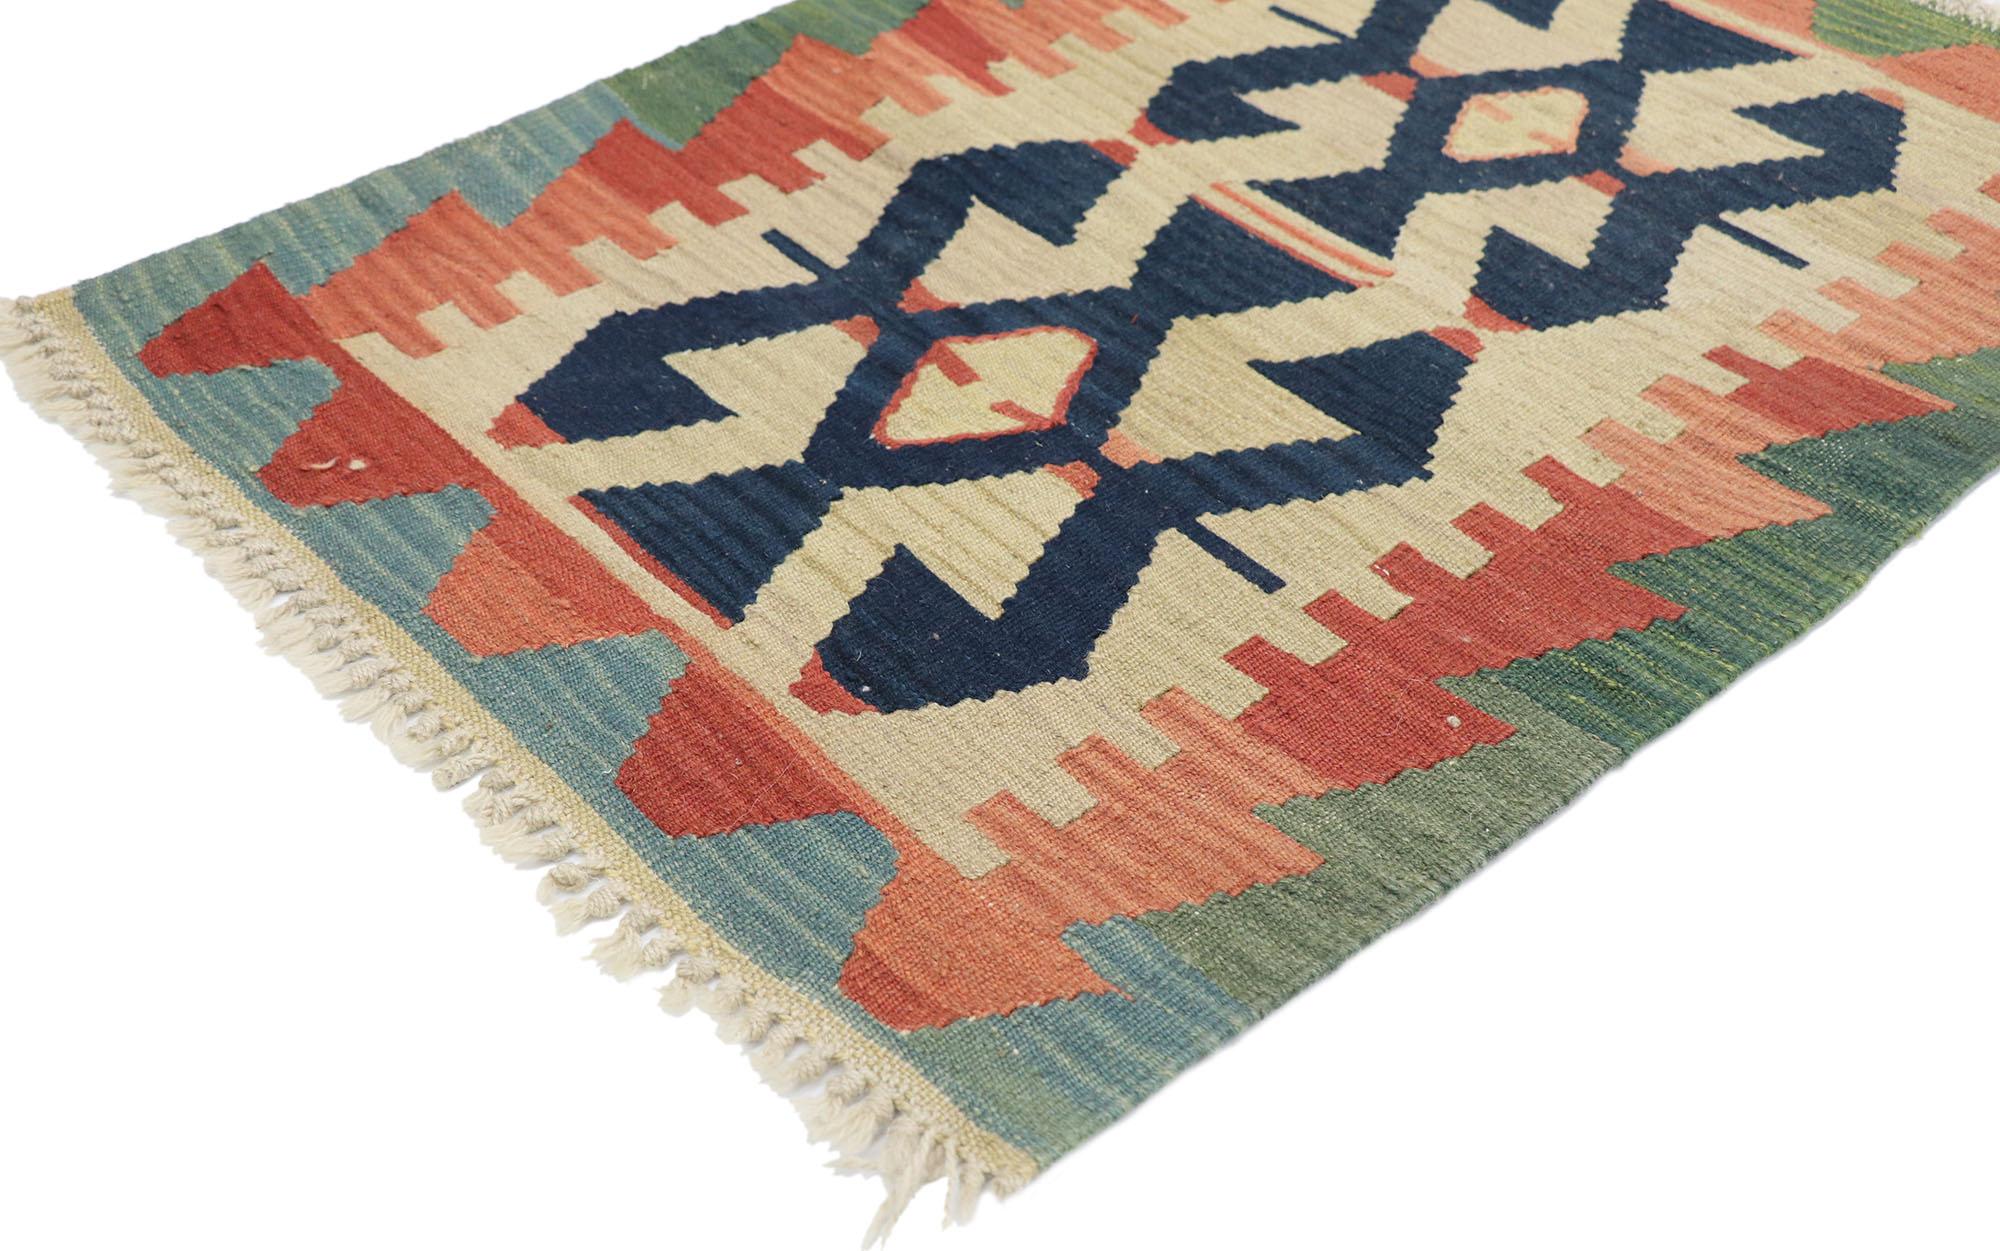 77893 Vintage Persian Shiraz Kilim rug with Tribal style 02'01 x 02'10. Full of tiny details and a bold expressive design combined with vibrant colors and tribal style, this hand-woven wool vintage Persian Shiraz kilim rug is a captivating vision of